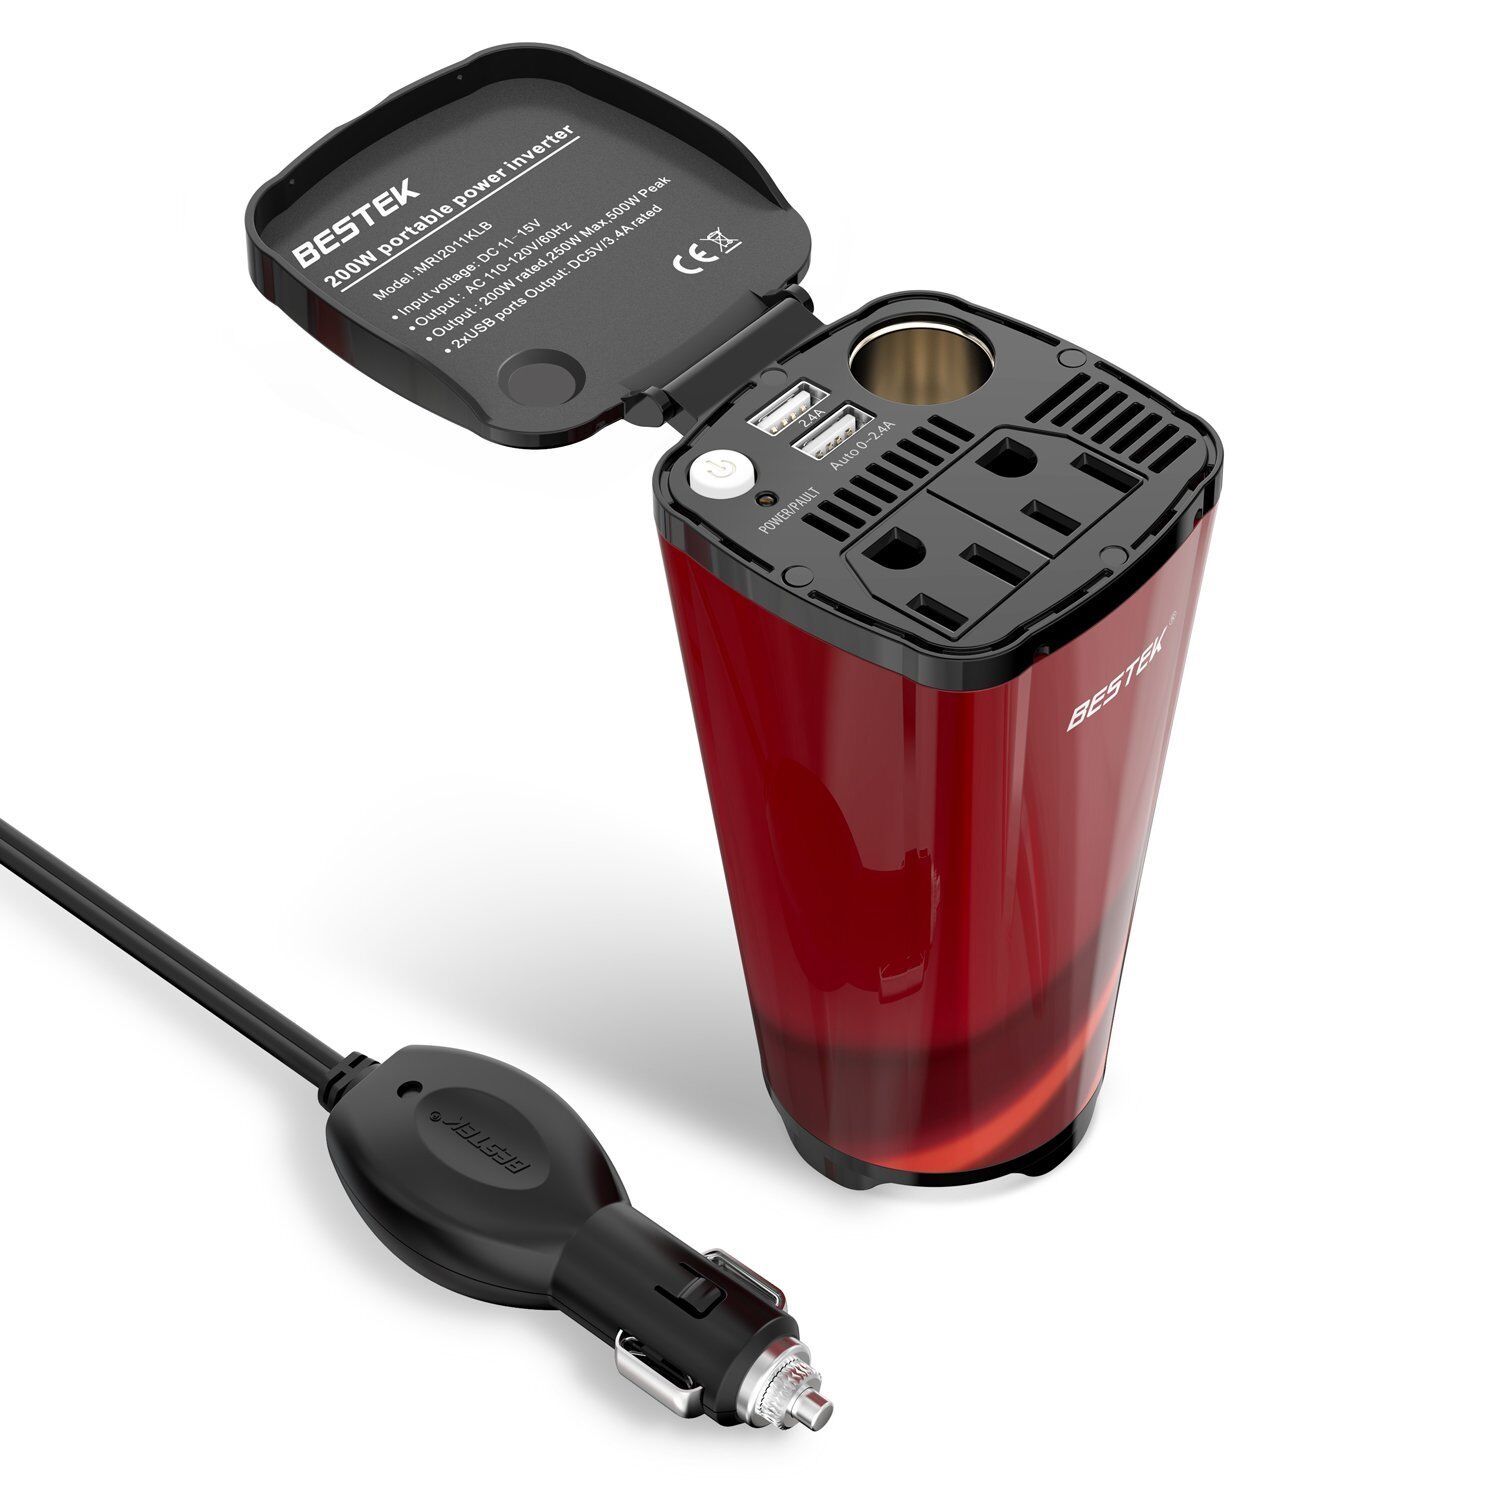 BESTEK 200W Car Power Inverter with 2 AC Outlets and 4.5A Dual USB Charging Port